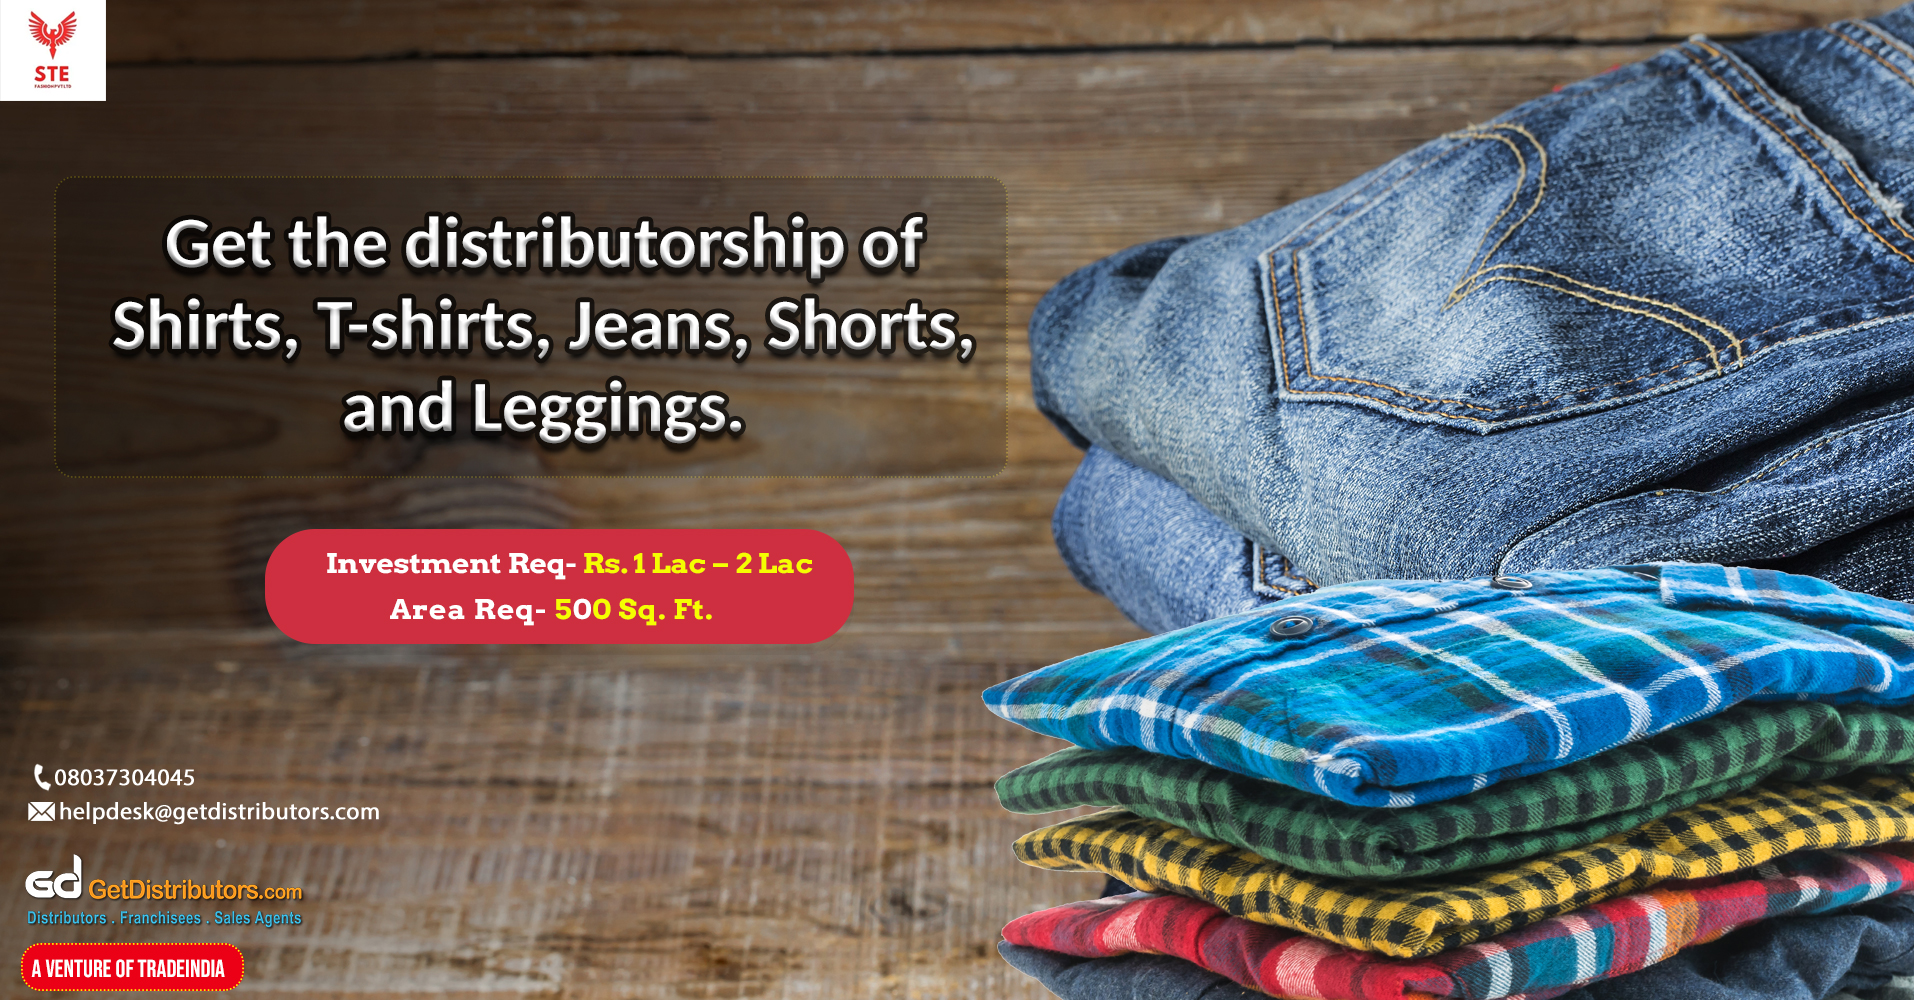 Best in class garments for distribution